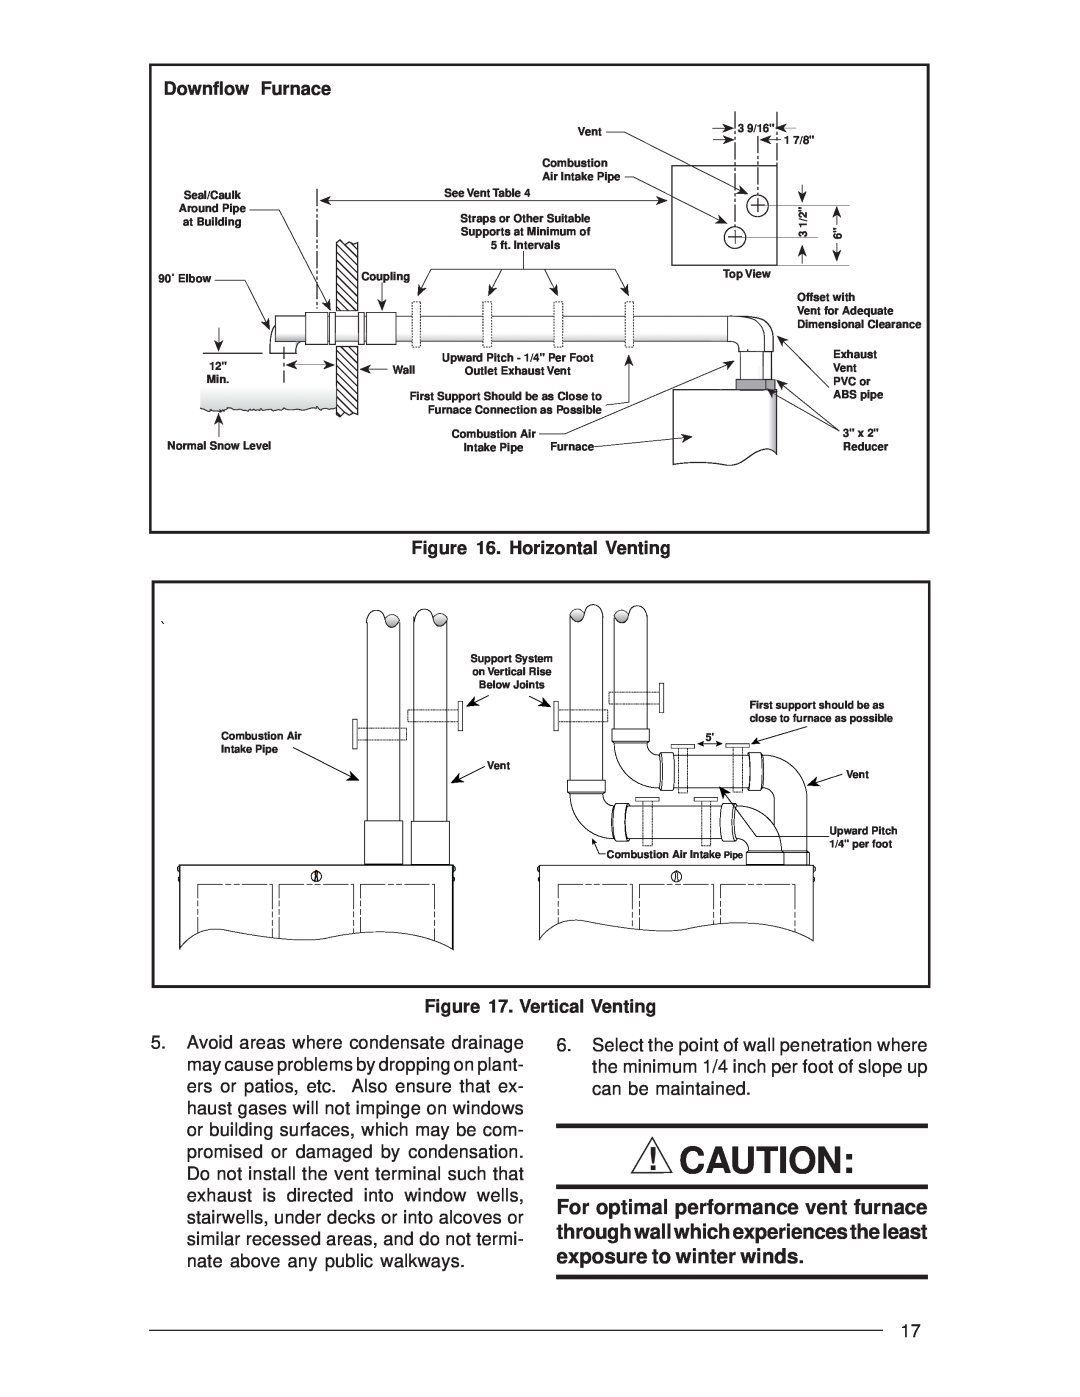 Nordyne M3RL installation instructions Downflow Furnace, Horizontal Venting, Vertical Venting 